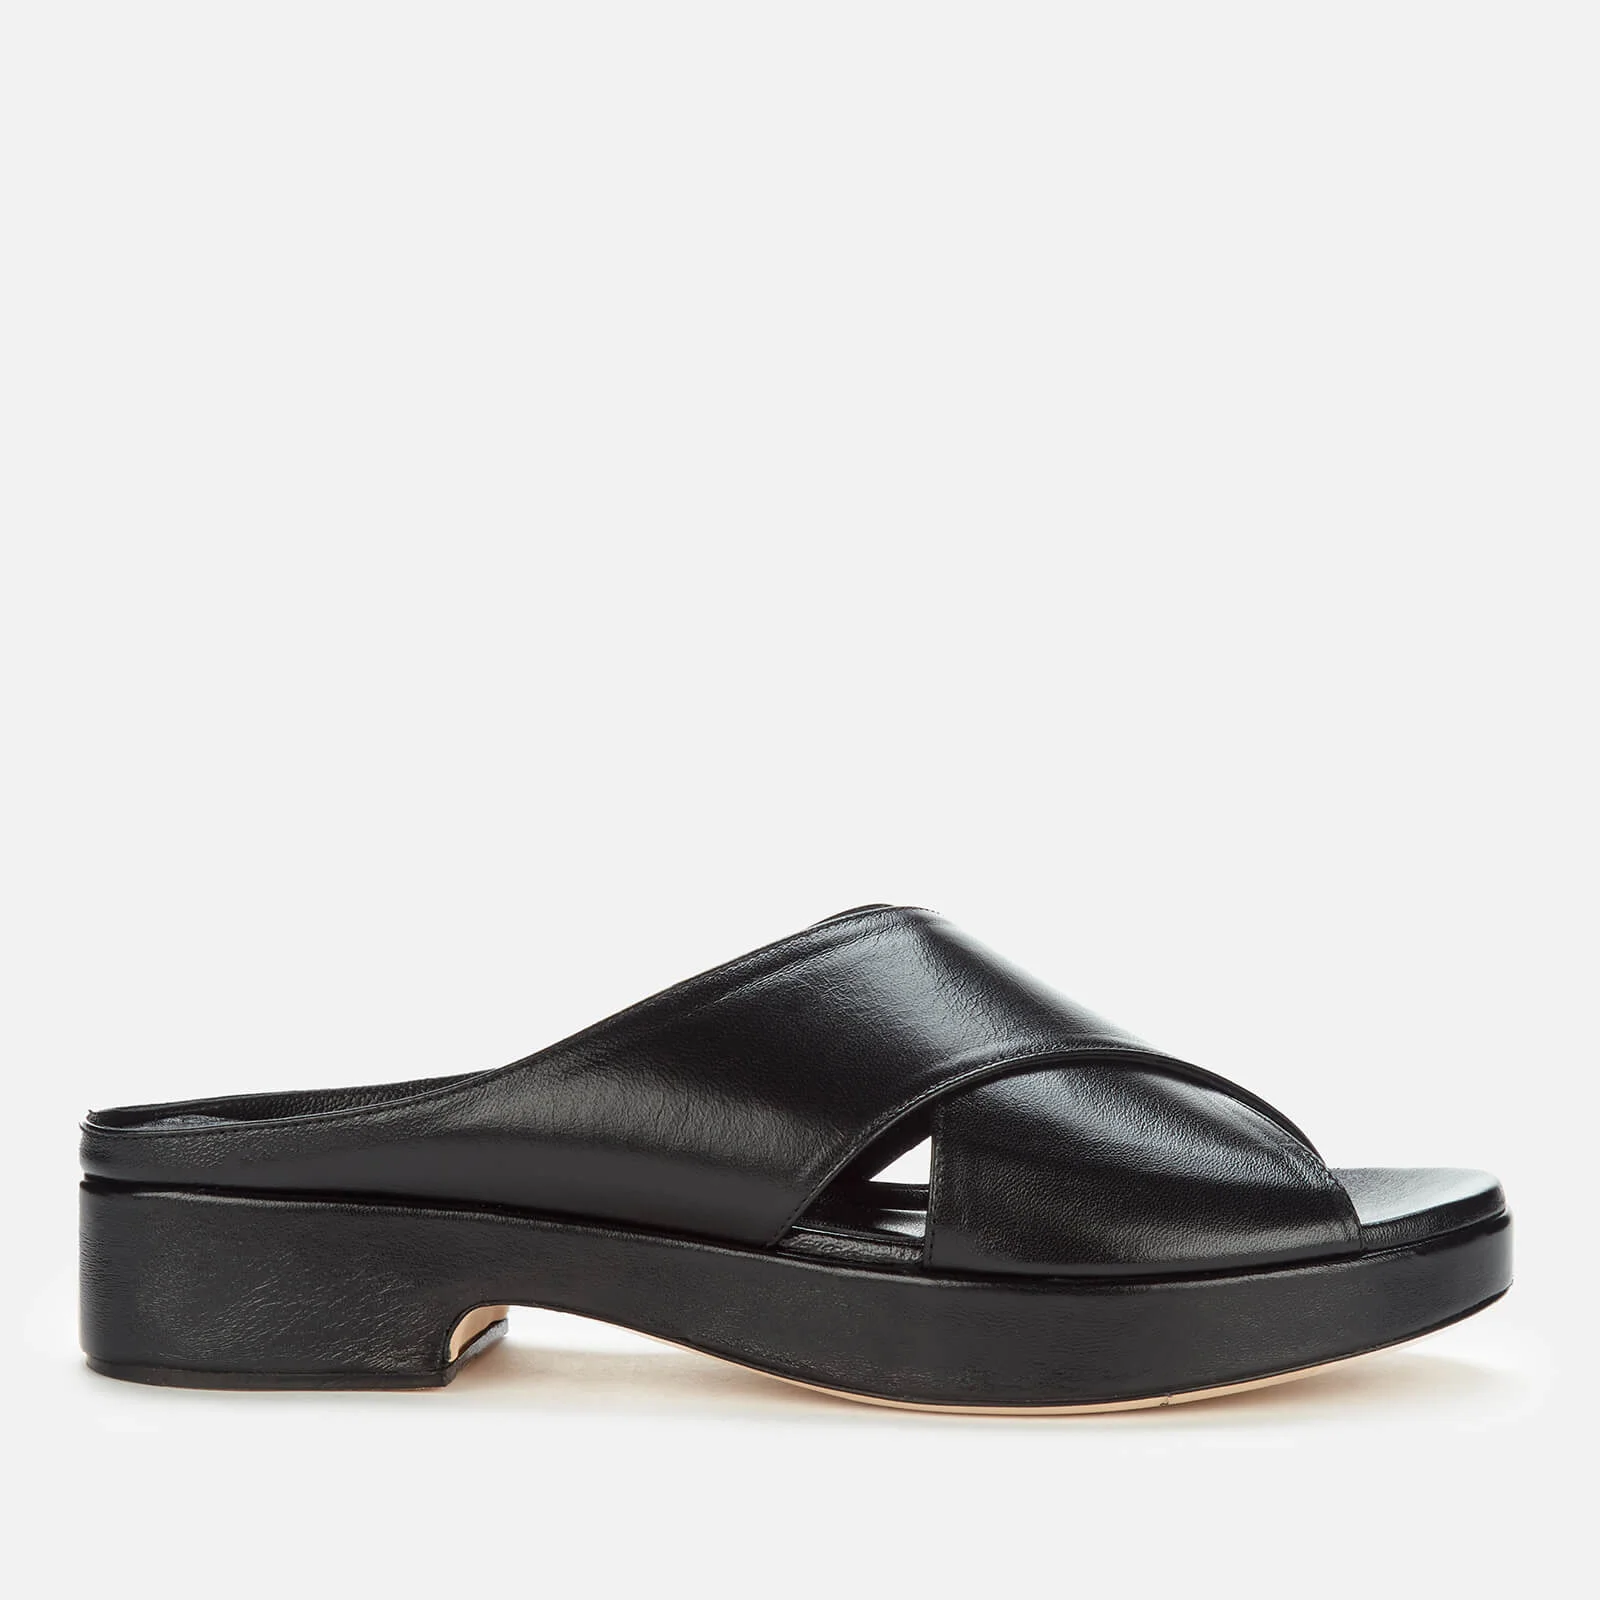 BY FAR Women's Iggy Leather Flat Sandals - Black Image 1